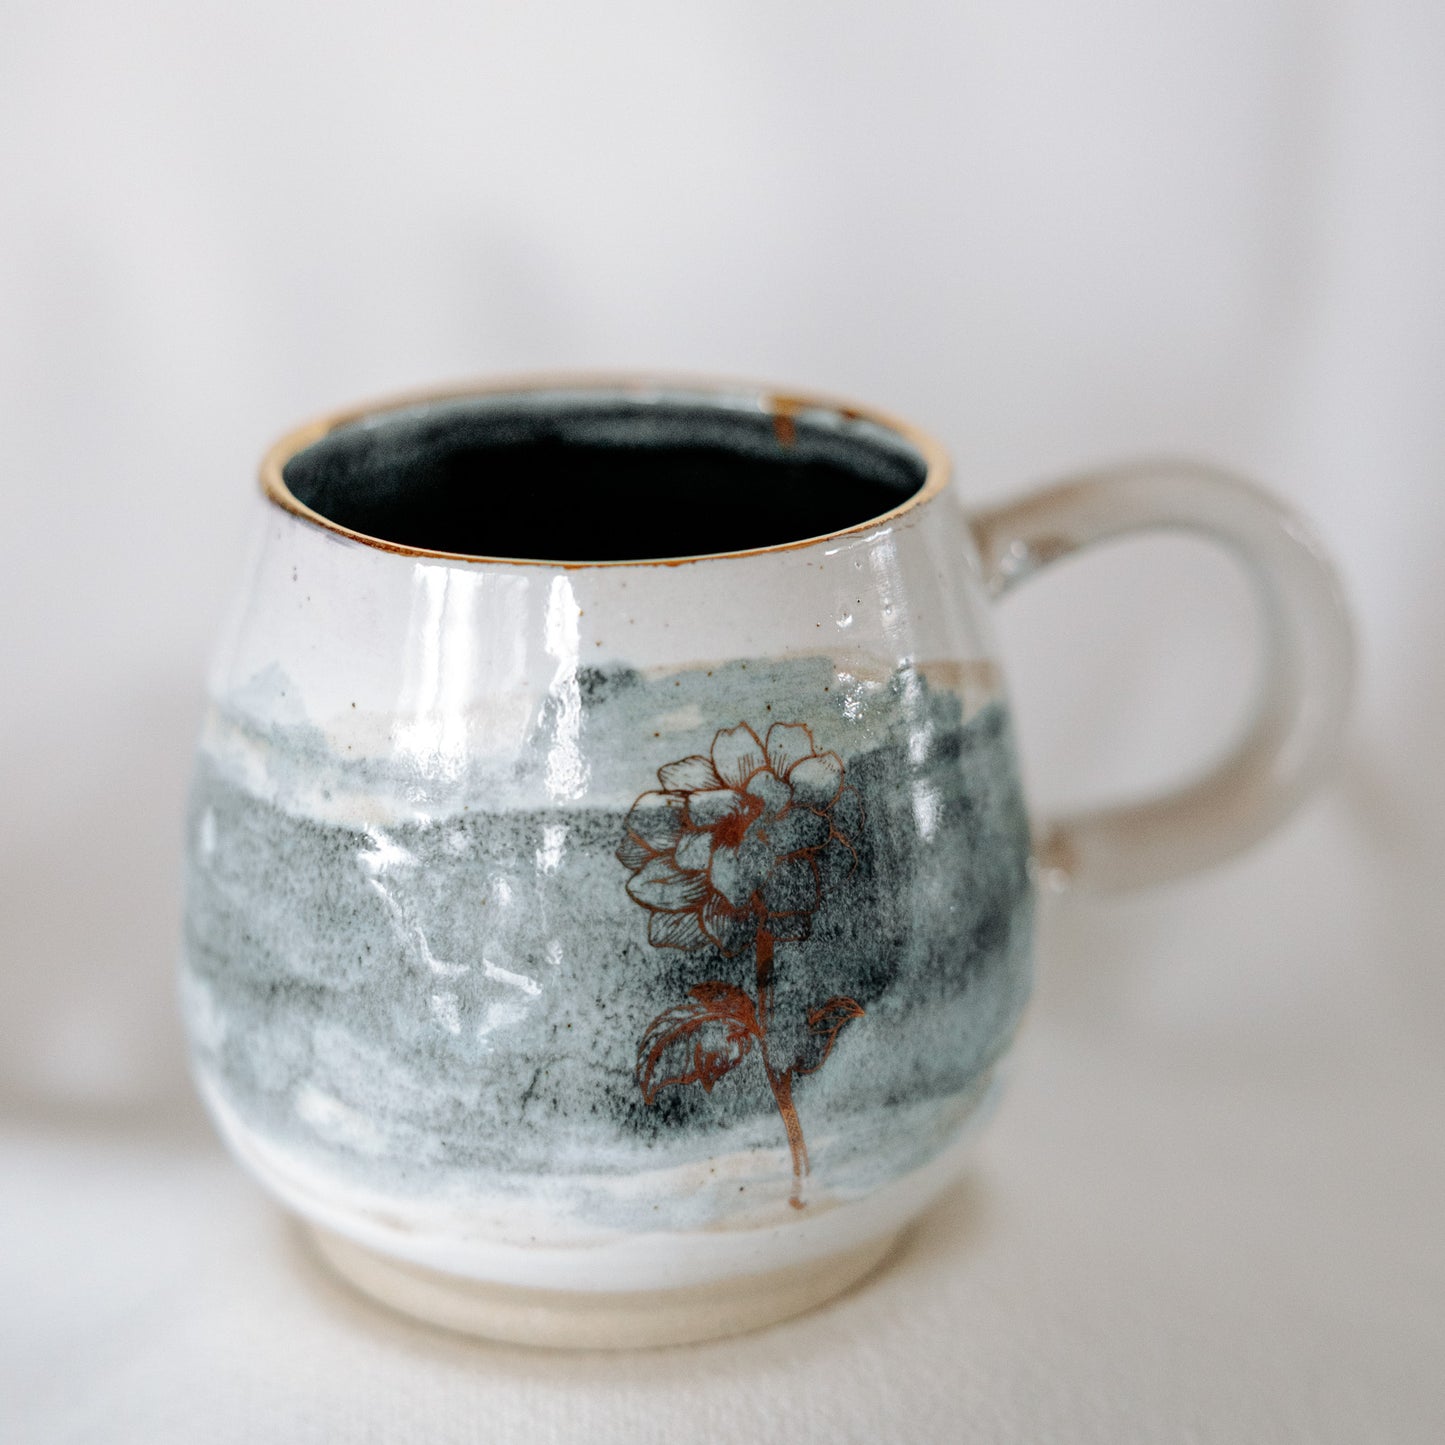 Teal and White Pottery Mug with a Gold Flower Decal